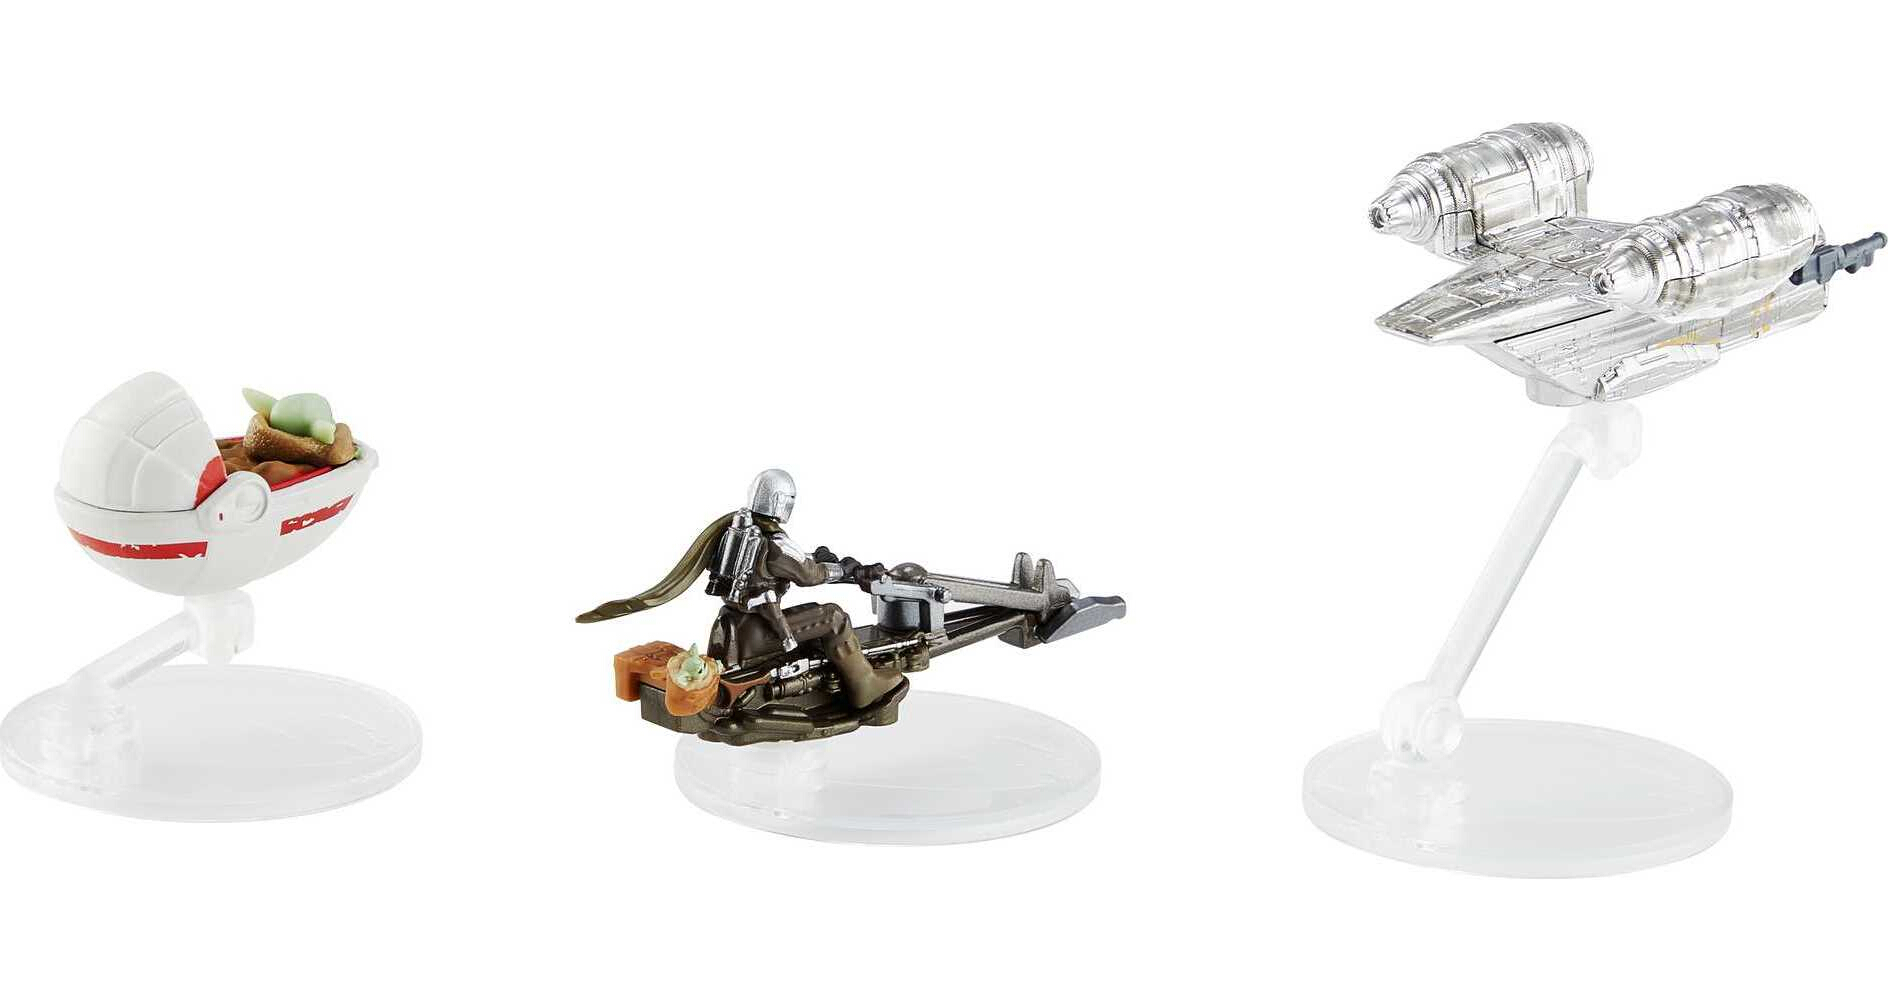 Hot Wheels Star Wars Starships 3-Pack Inspired by The Mandalorian, Set of 3 Die-Cast Ships - image 4 of 4